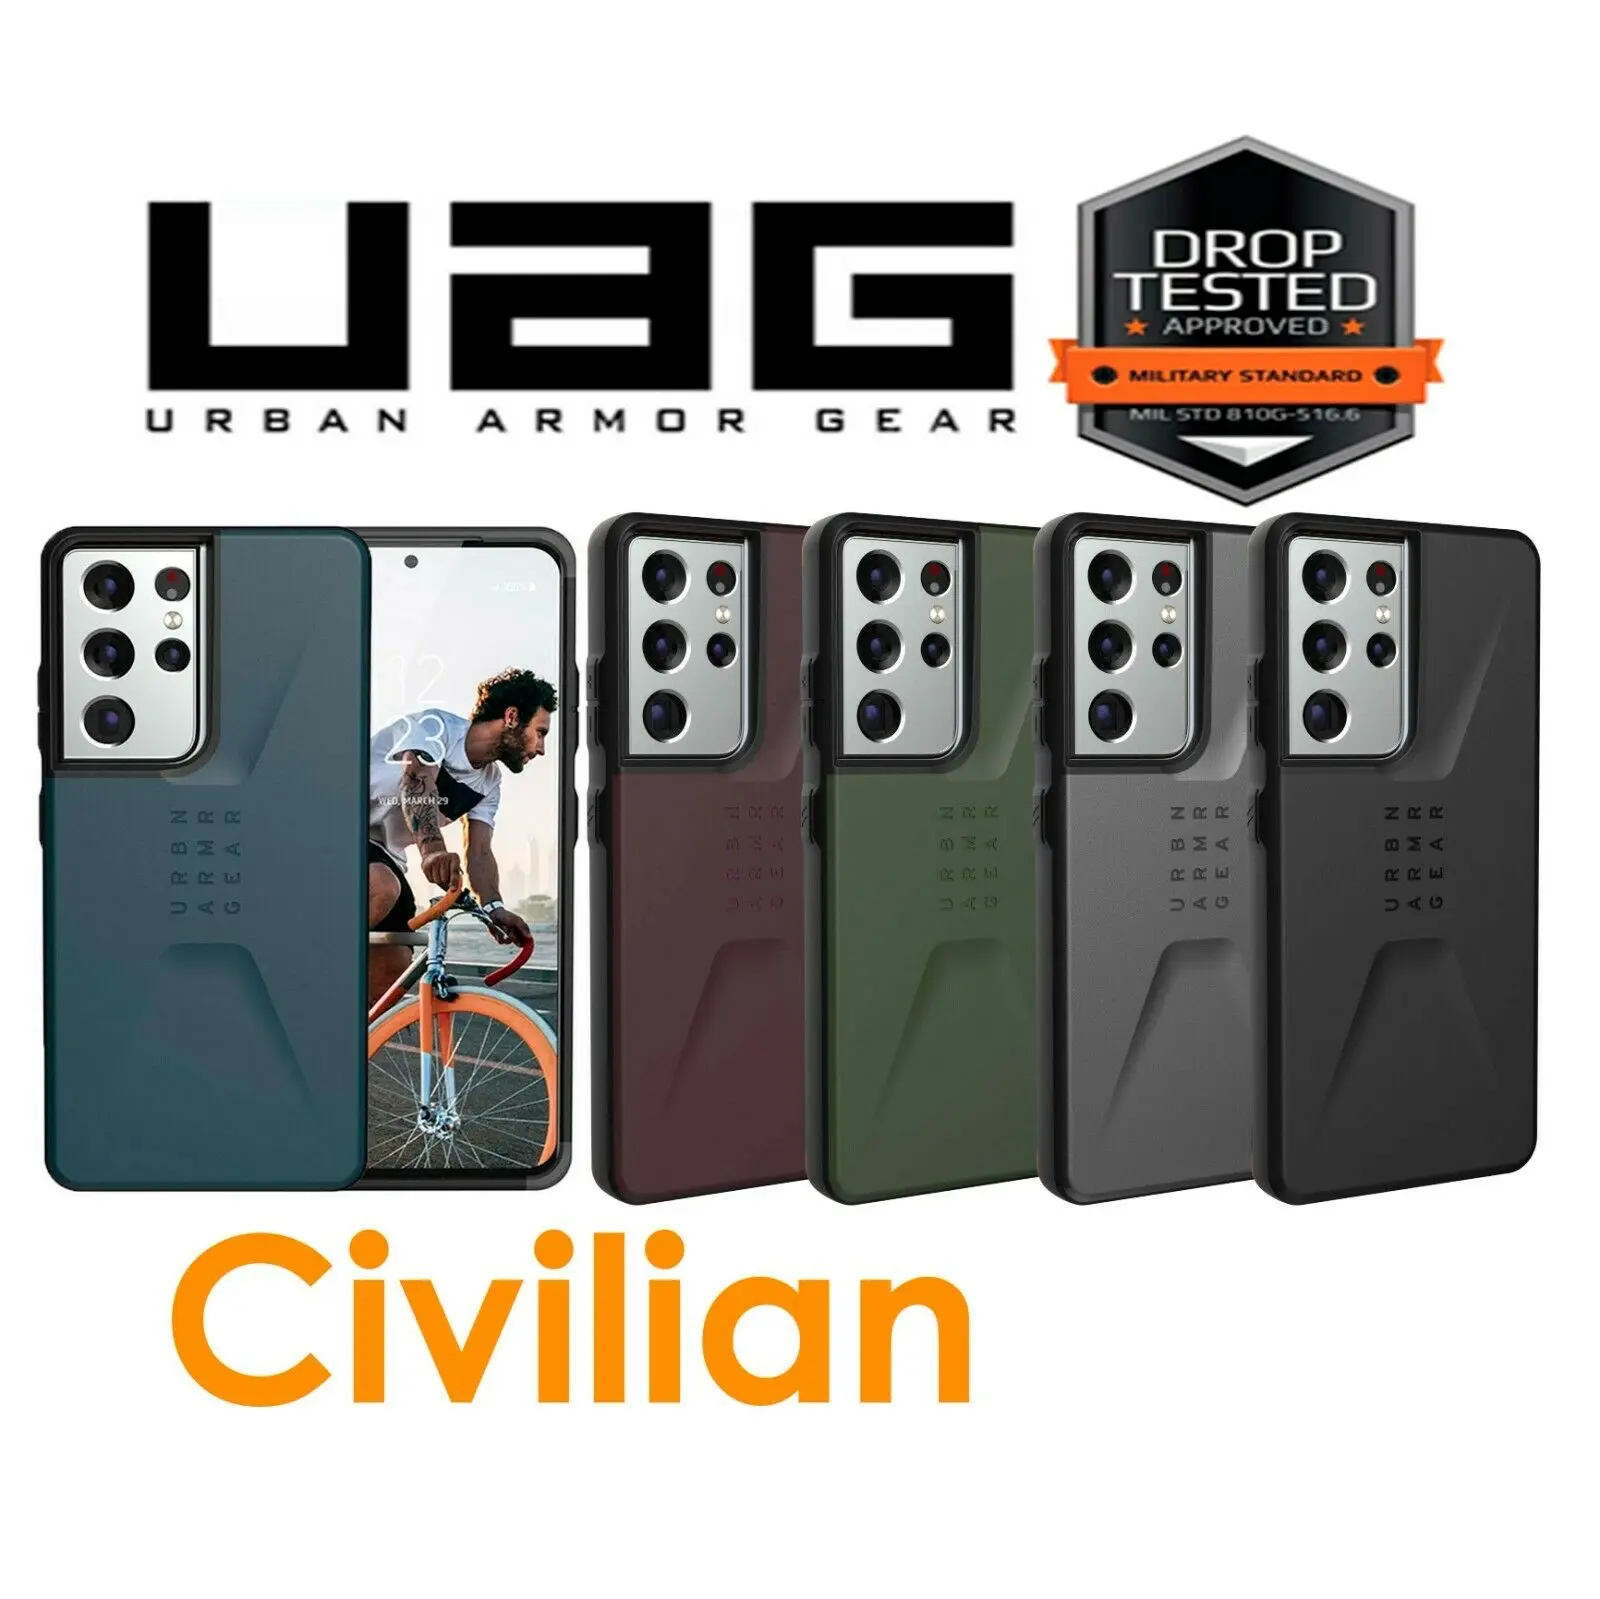 

Original UAG Gear Civilian Samsung Galaxy S21 Ultra 5G Rugged Case Protective Cover Case Shockproof for Galaxy S21 Plus + S21